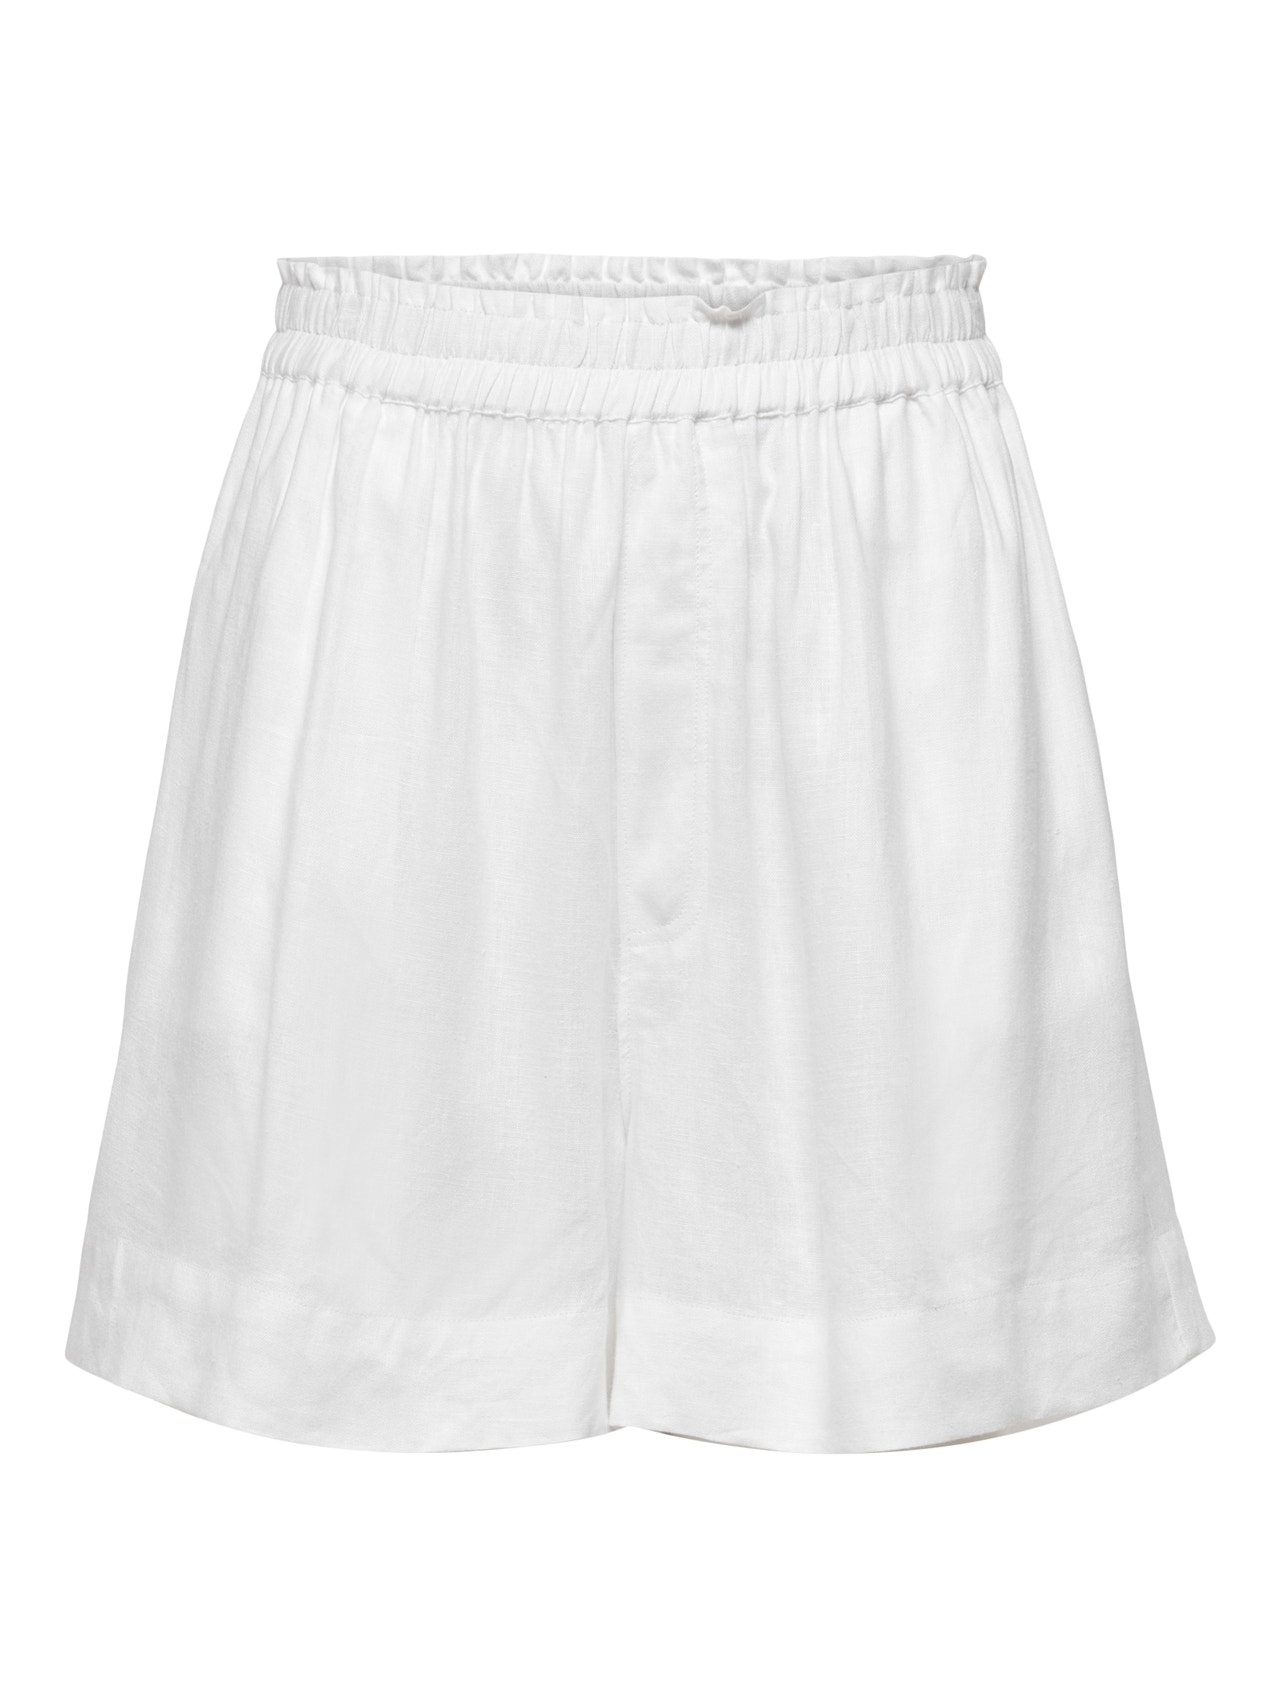 ONLY High waisted linen blend Shorts -Bright White - 15259587